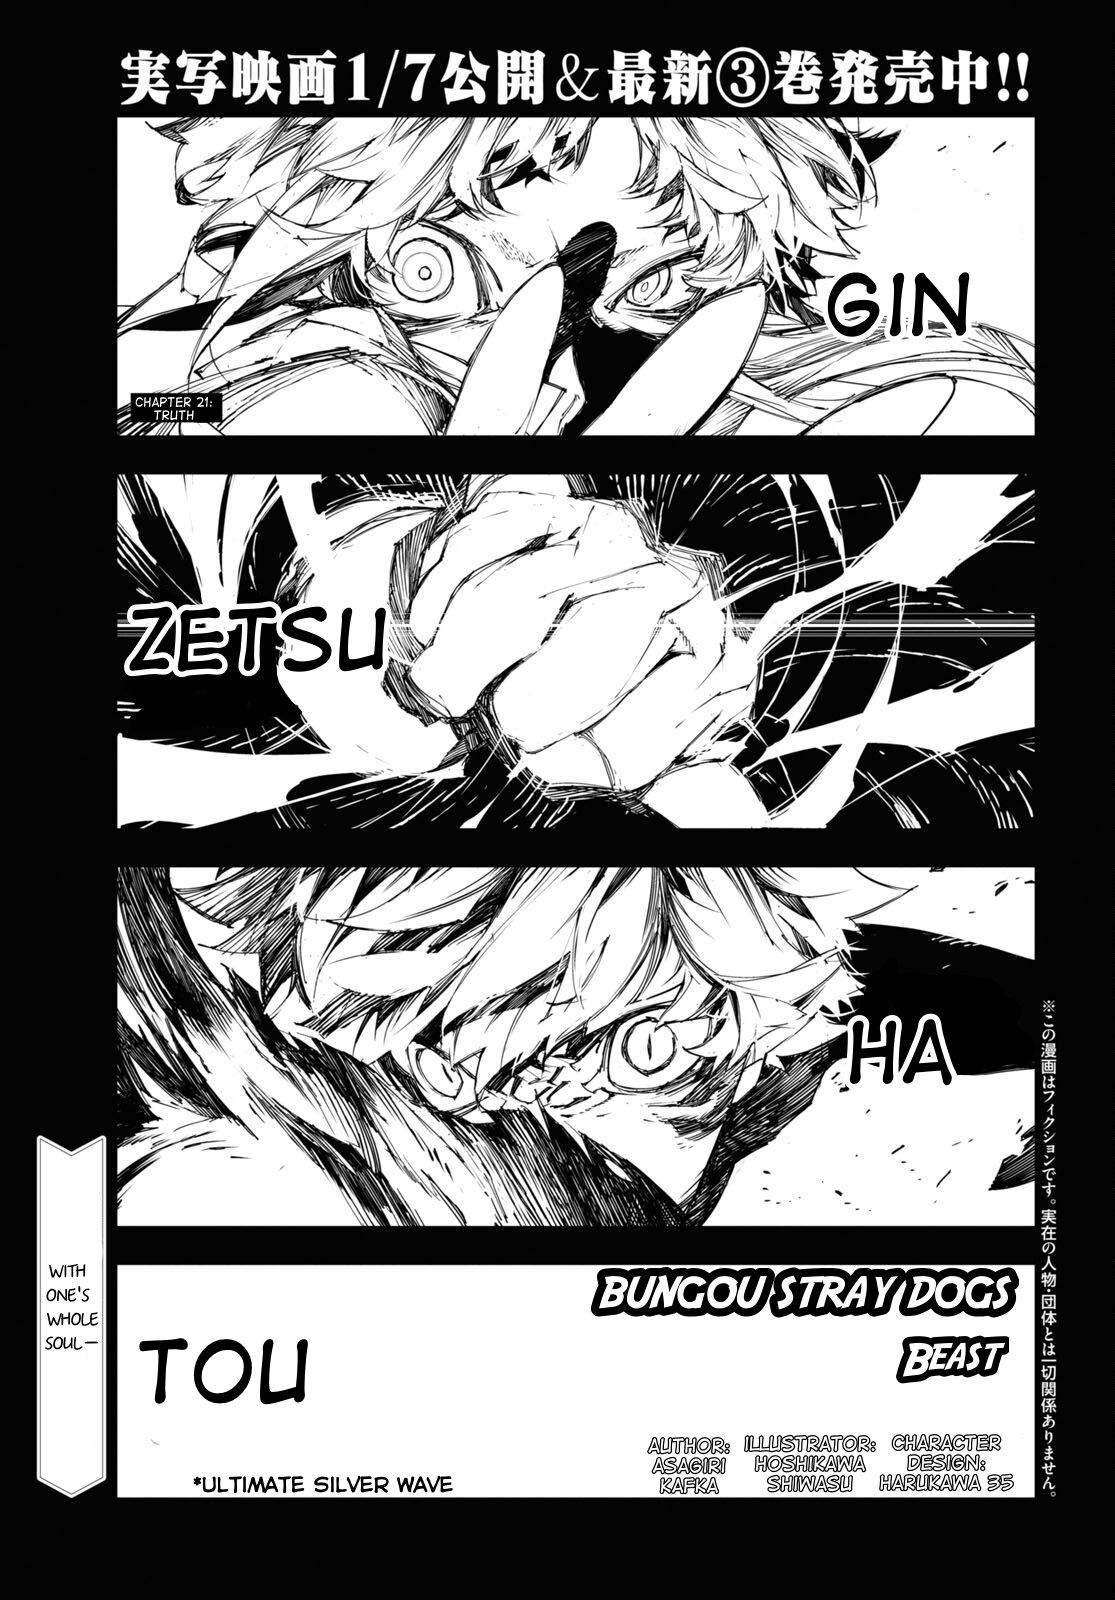 Read Bungo Stray Dogs Manga Online - [Latest Chapters]